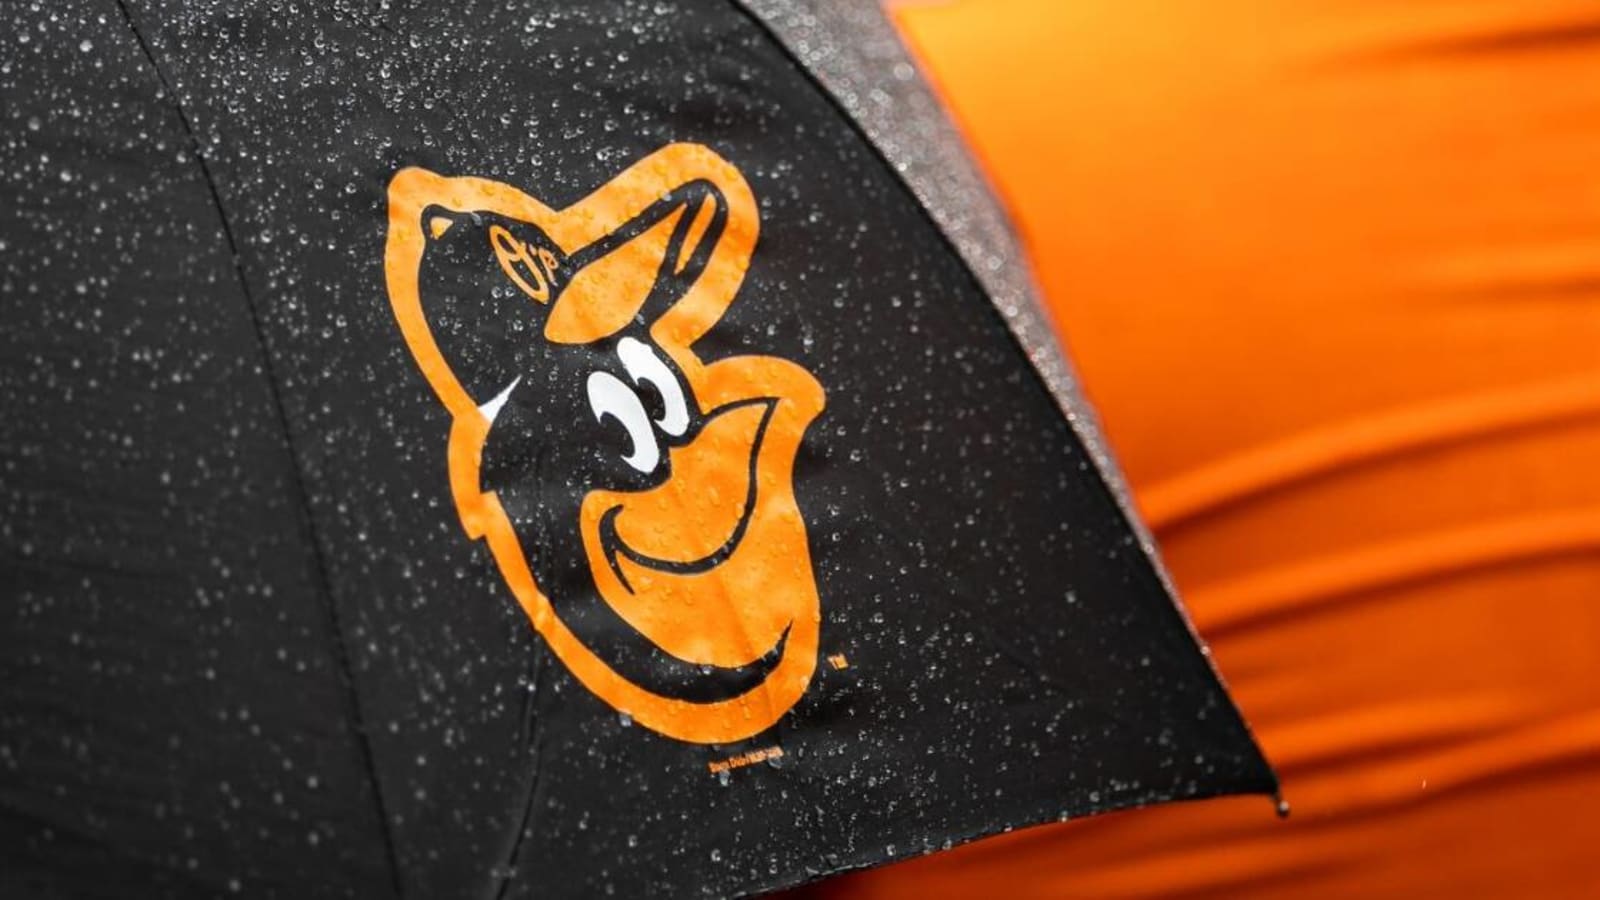 Baltimore Orioles’ new ownership group buys beer for every fan in local pub to celebrate Opening Day